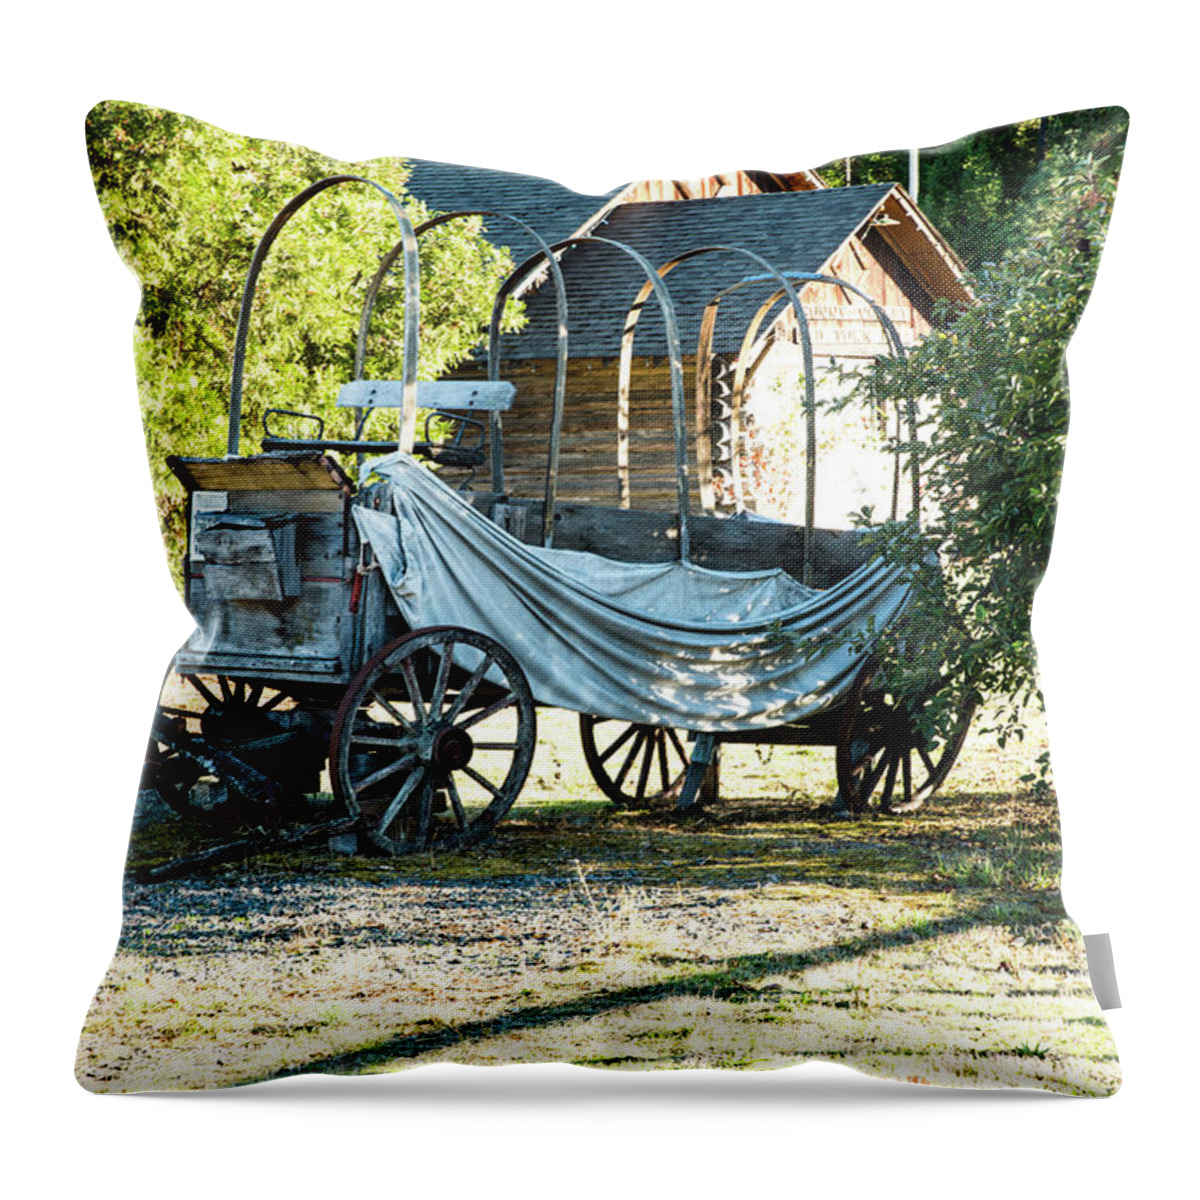 Sagging Conestoga Many Miles Throw Pillow featuring the photograph Sagging Conestoga Many Miles by Tom Cochran